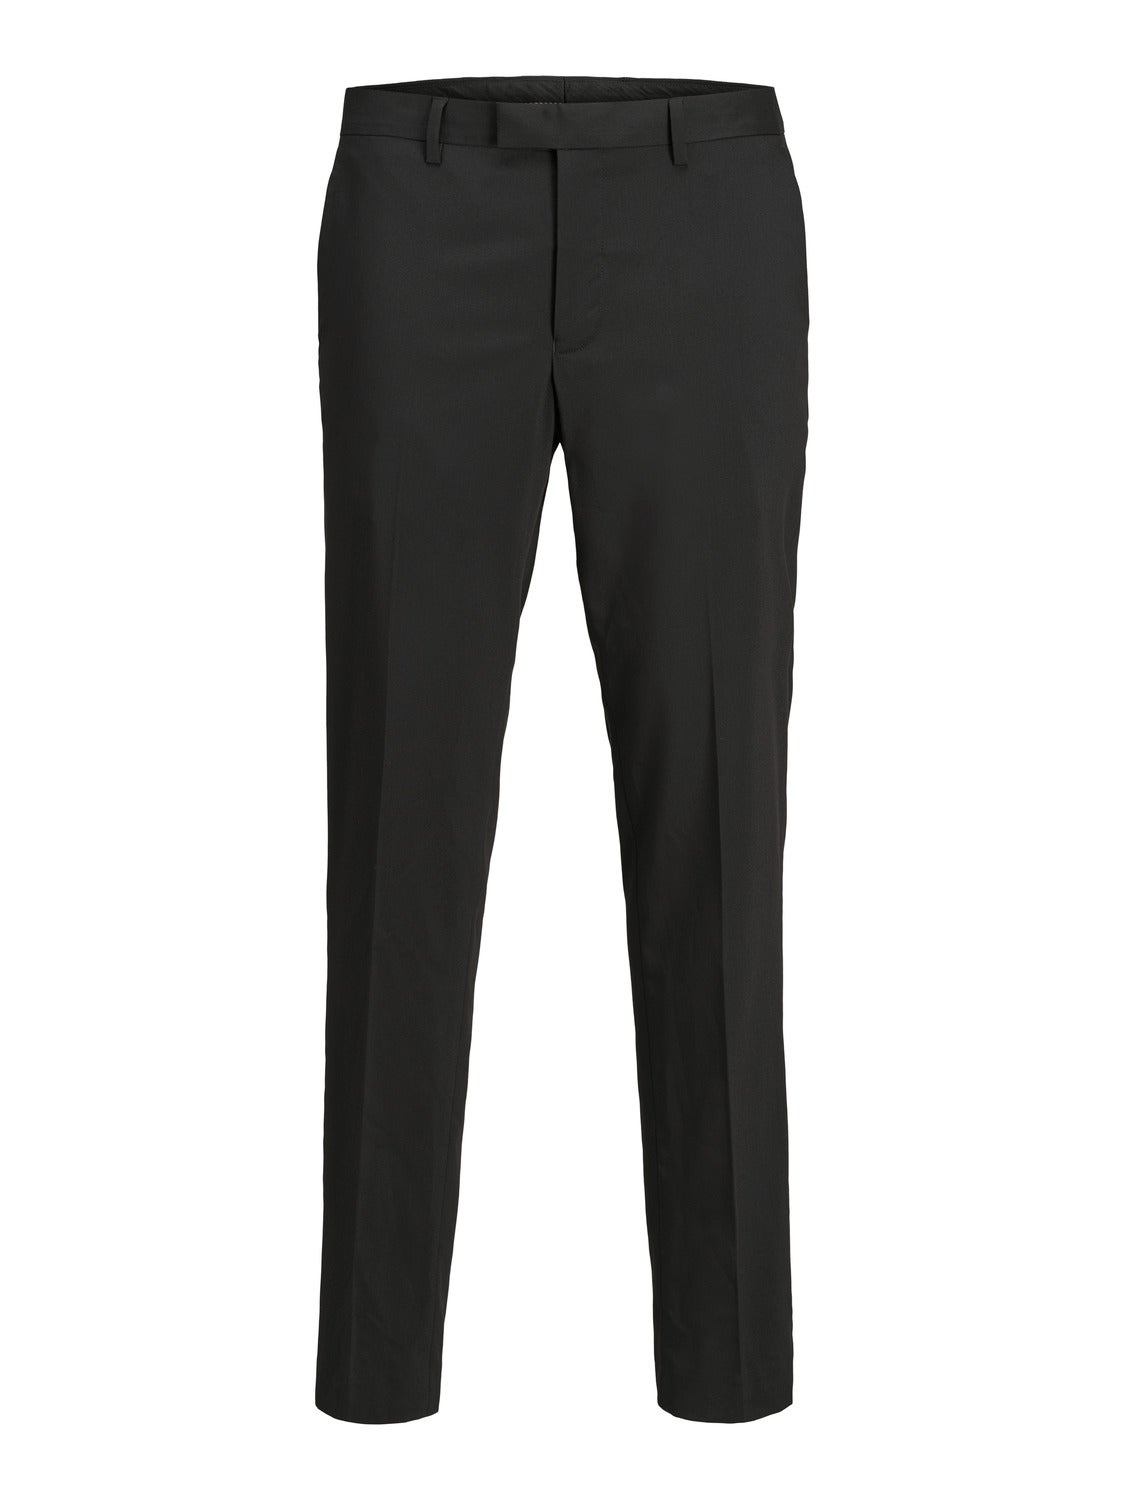 Buy Women Black Regular Fit Solid Business Casual Trousers Online - 258336  | Allen Solly